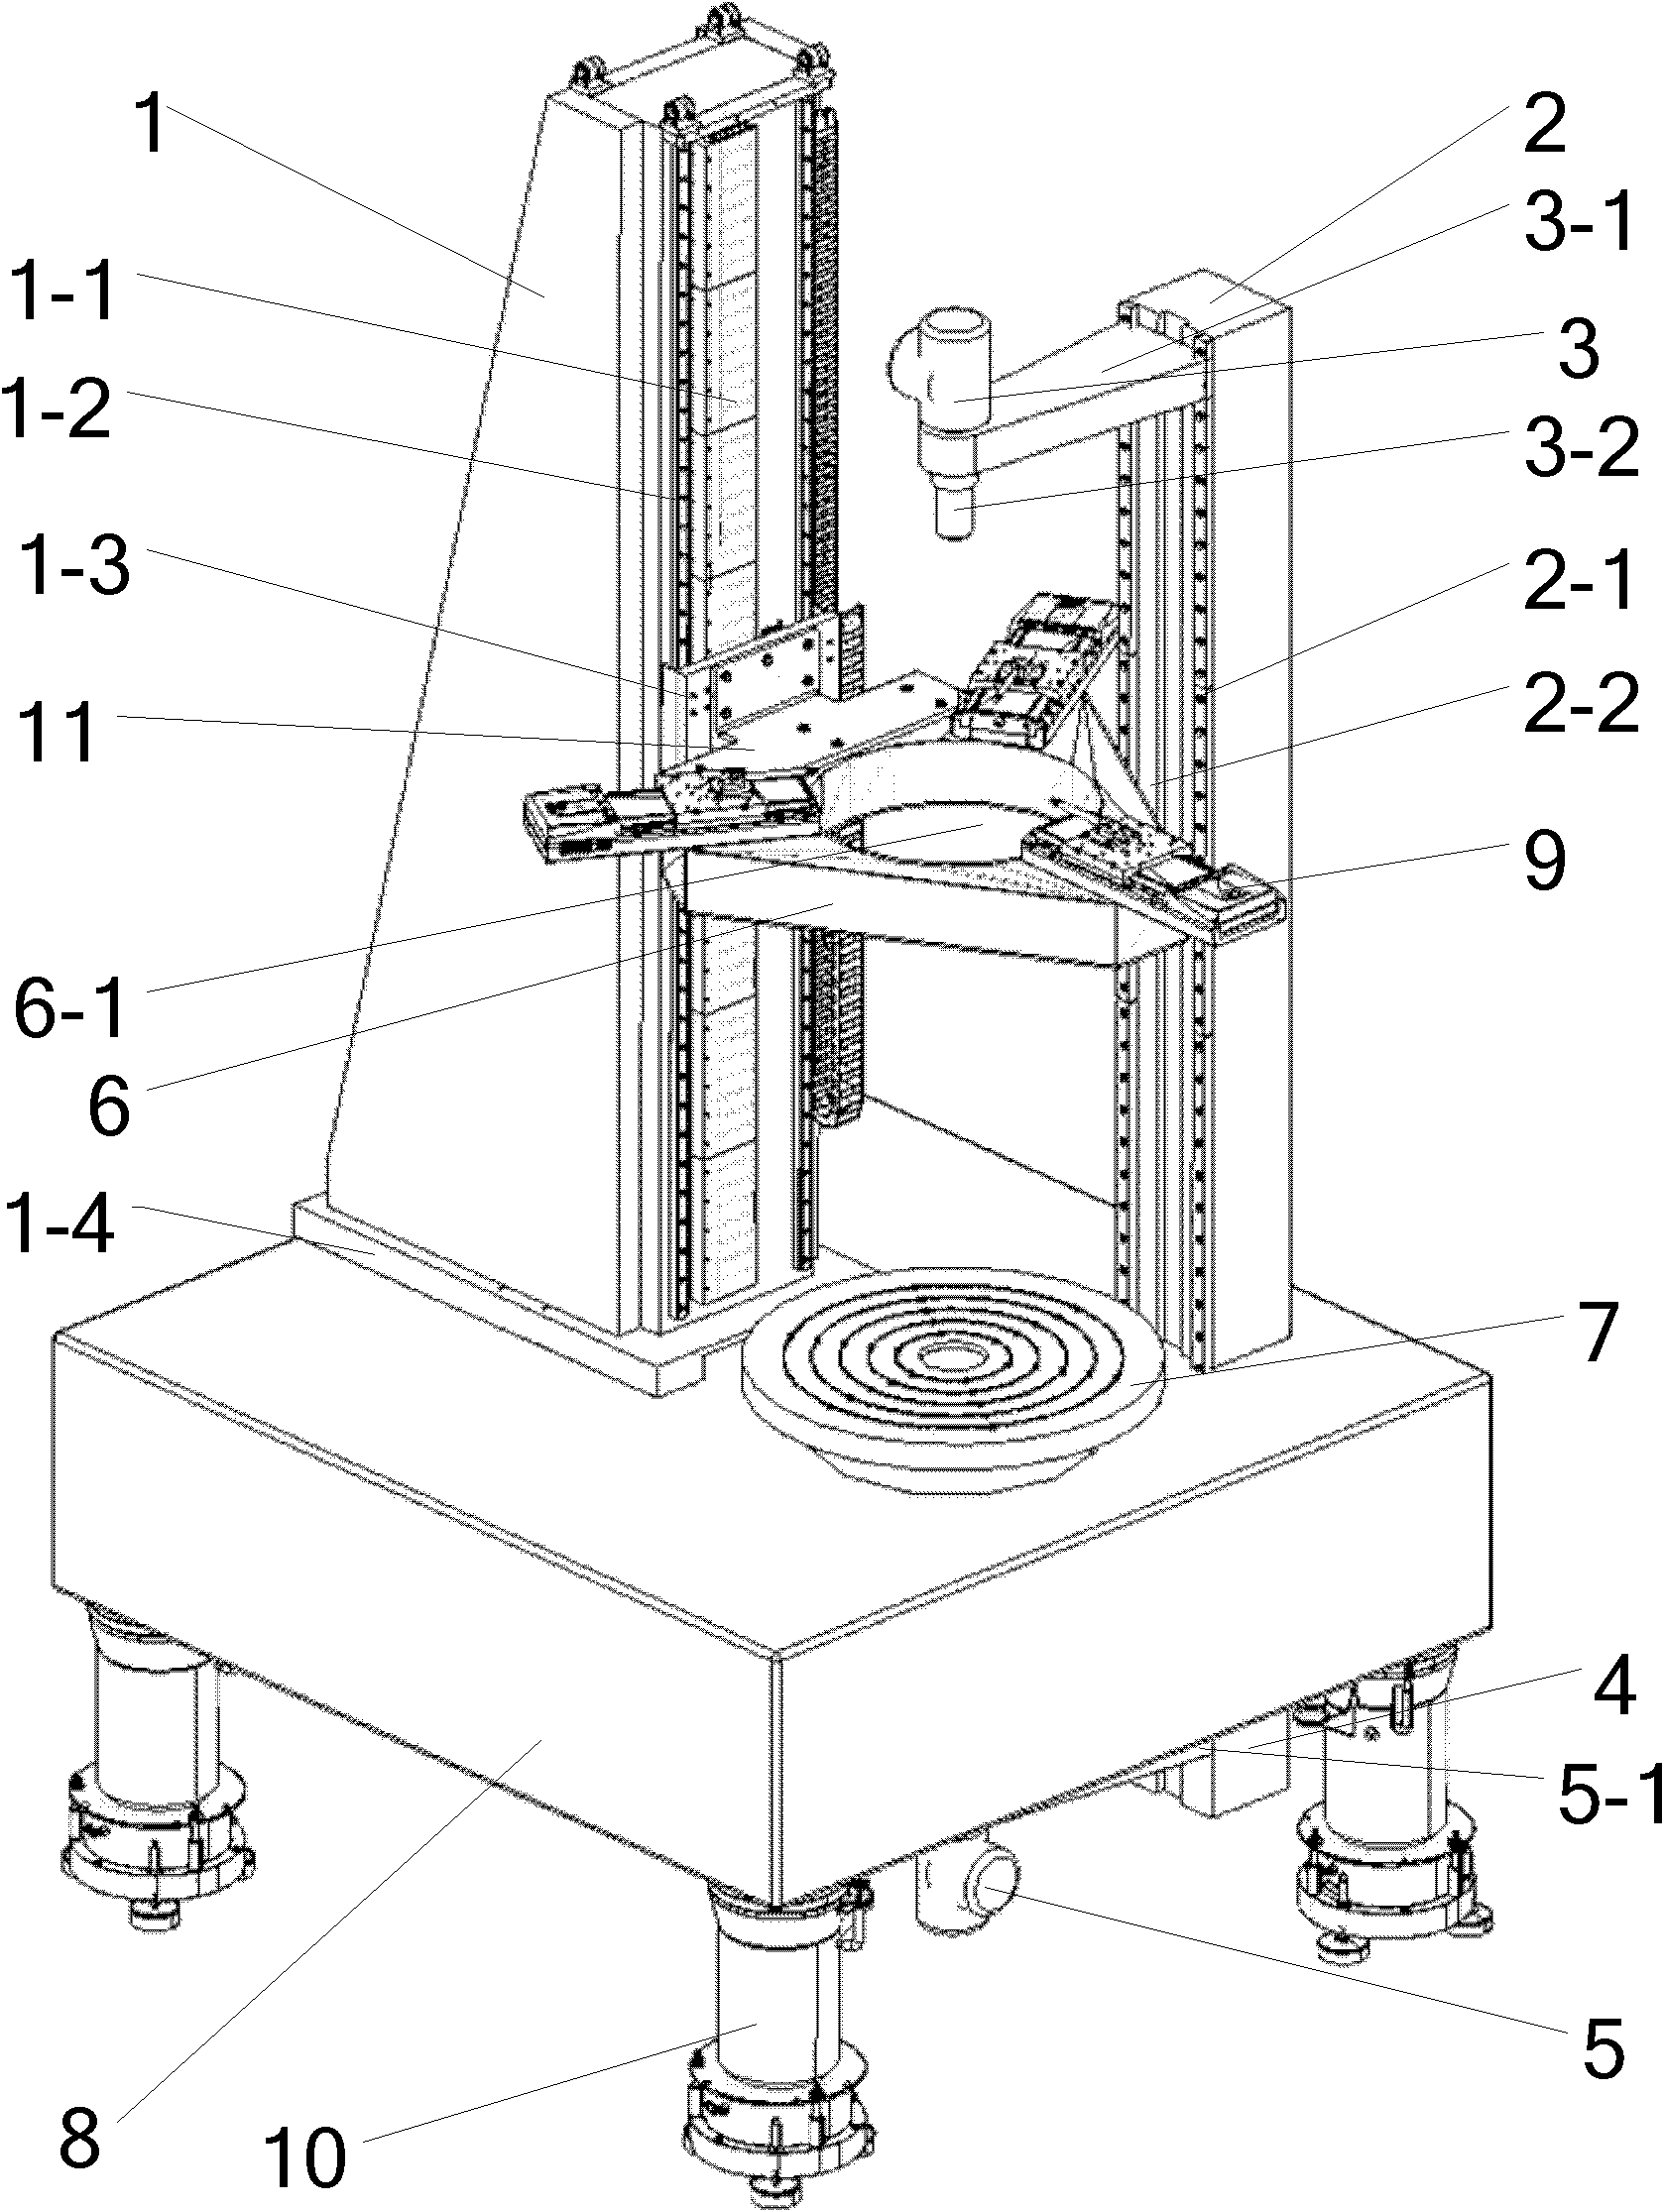 An assembly and adjustment device for projection objective lens of lithography machine